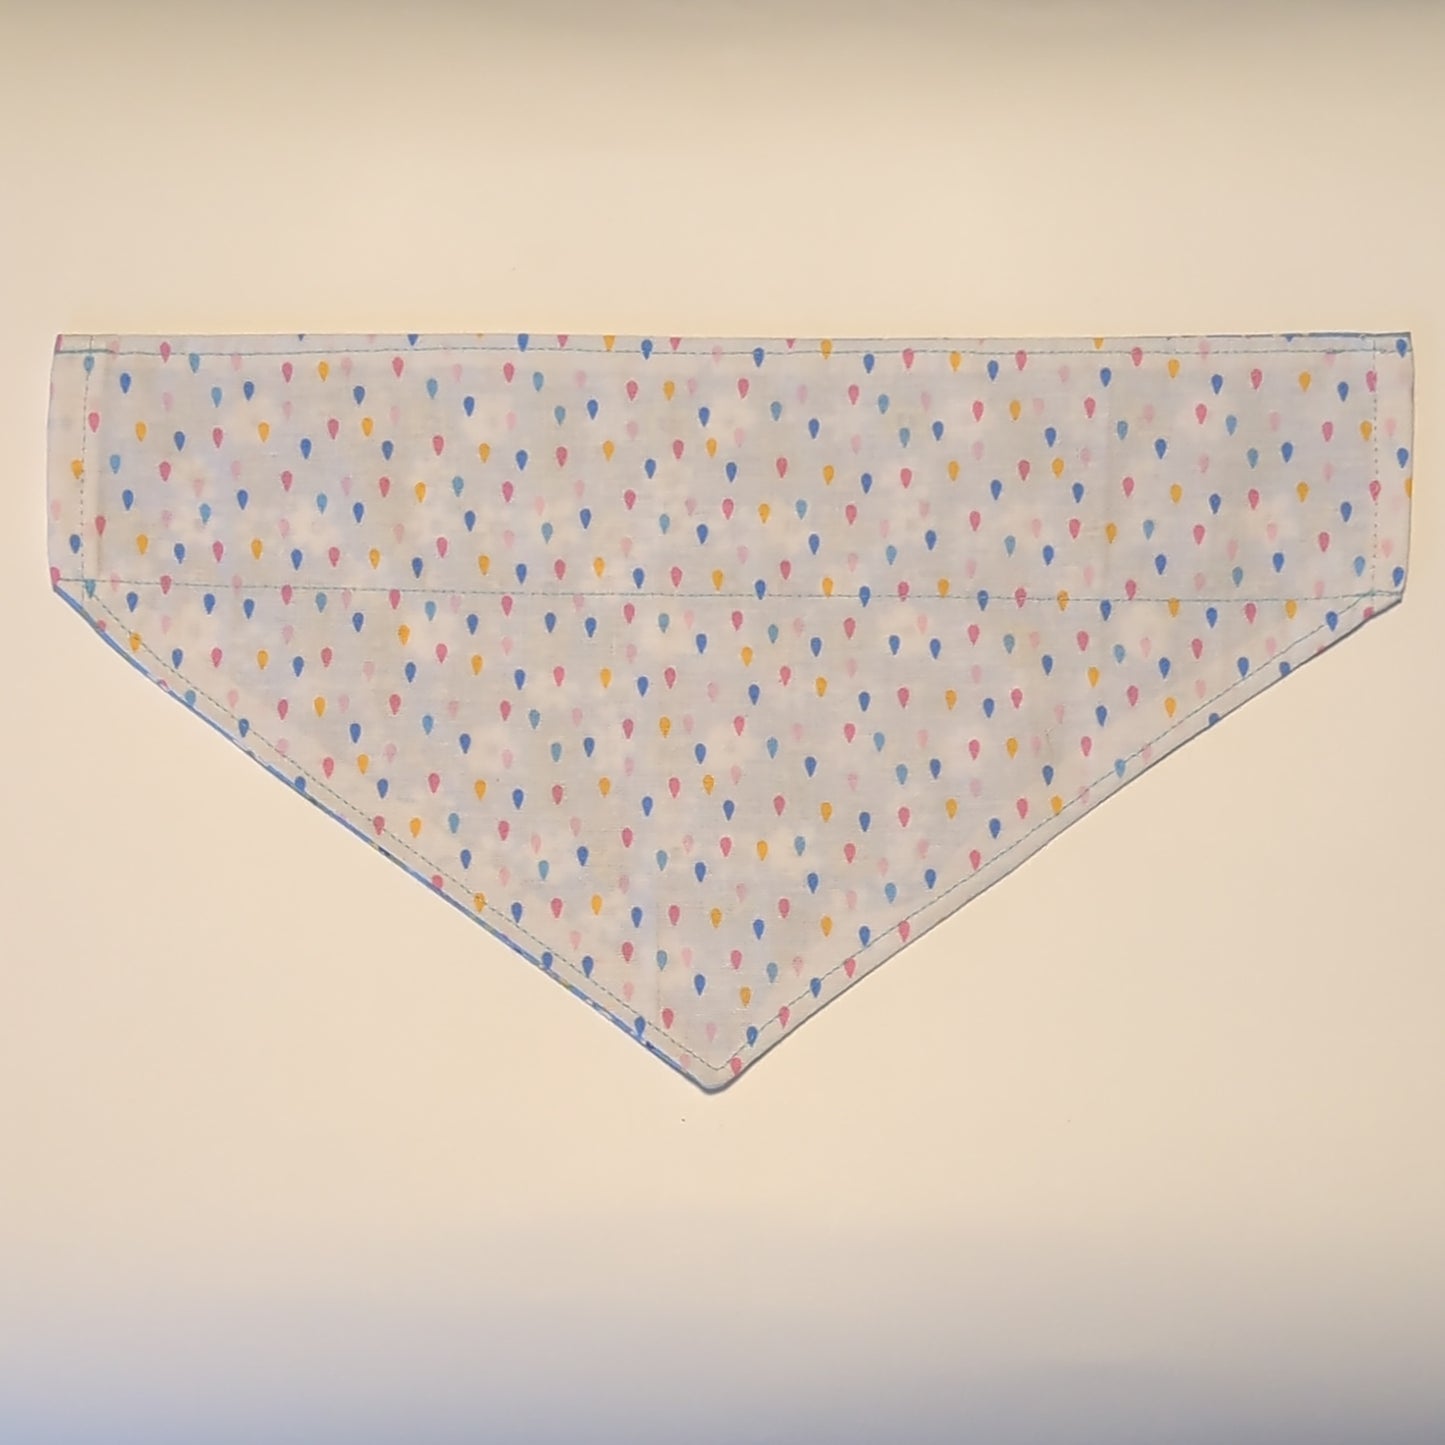 NOW HALF PRICE ! Dog Bandana, Medium Size.  Reversible:  Cute navy, white and yellow flowers on blue / multi tiny balloon shapes on white. High quality - hand made.